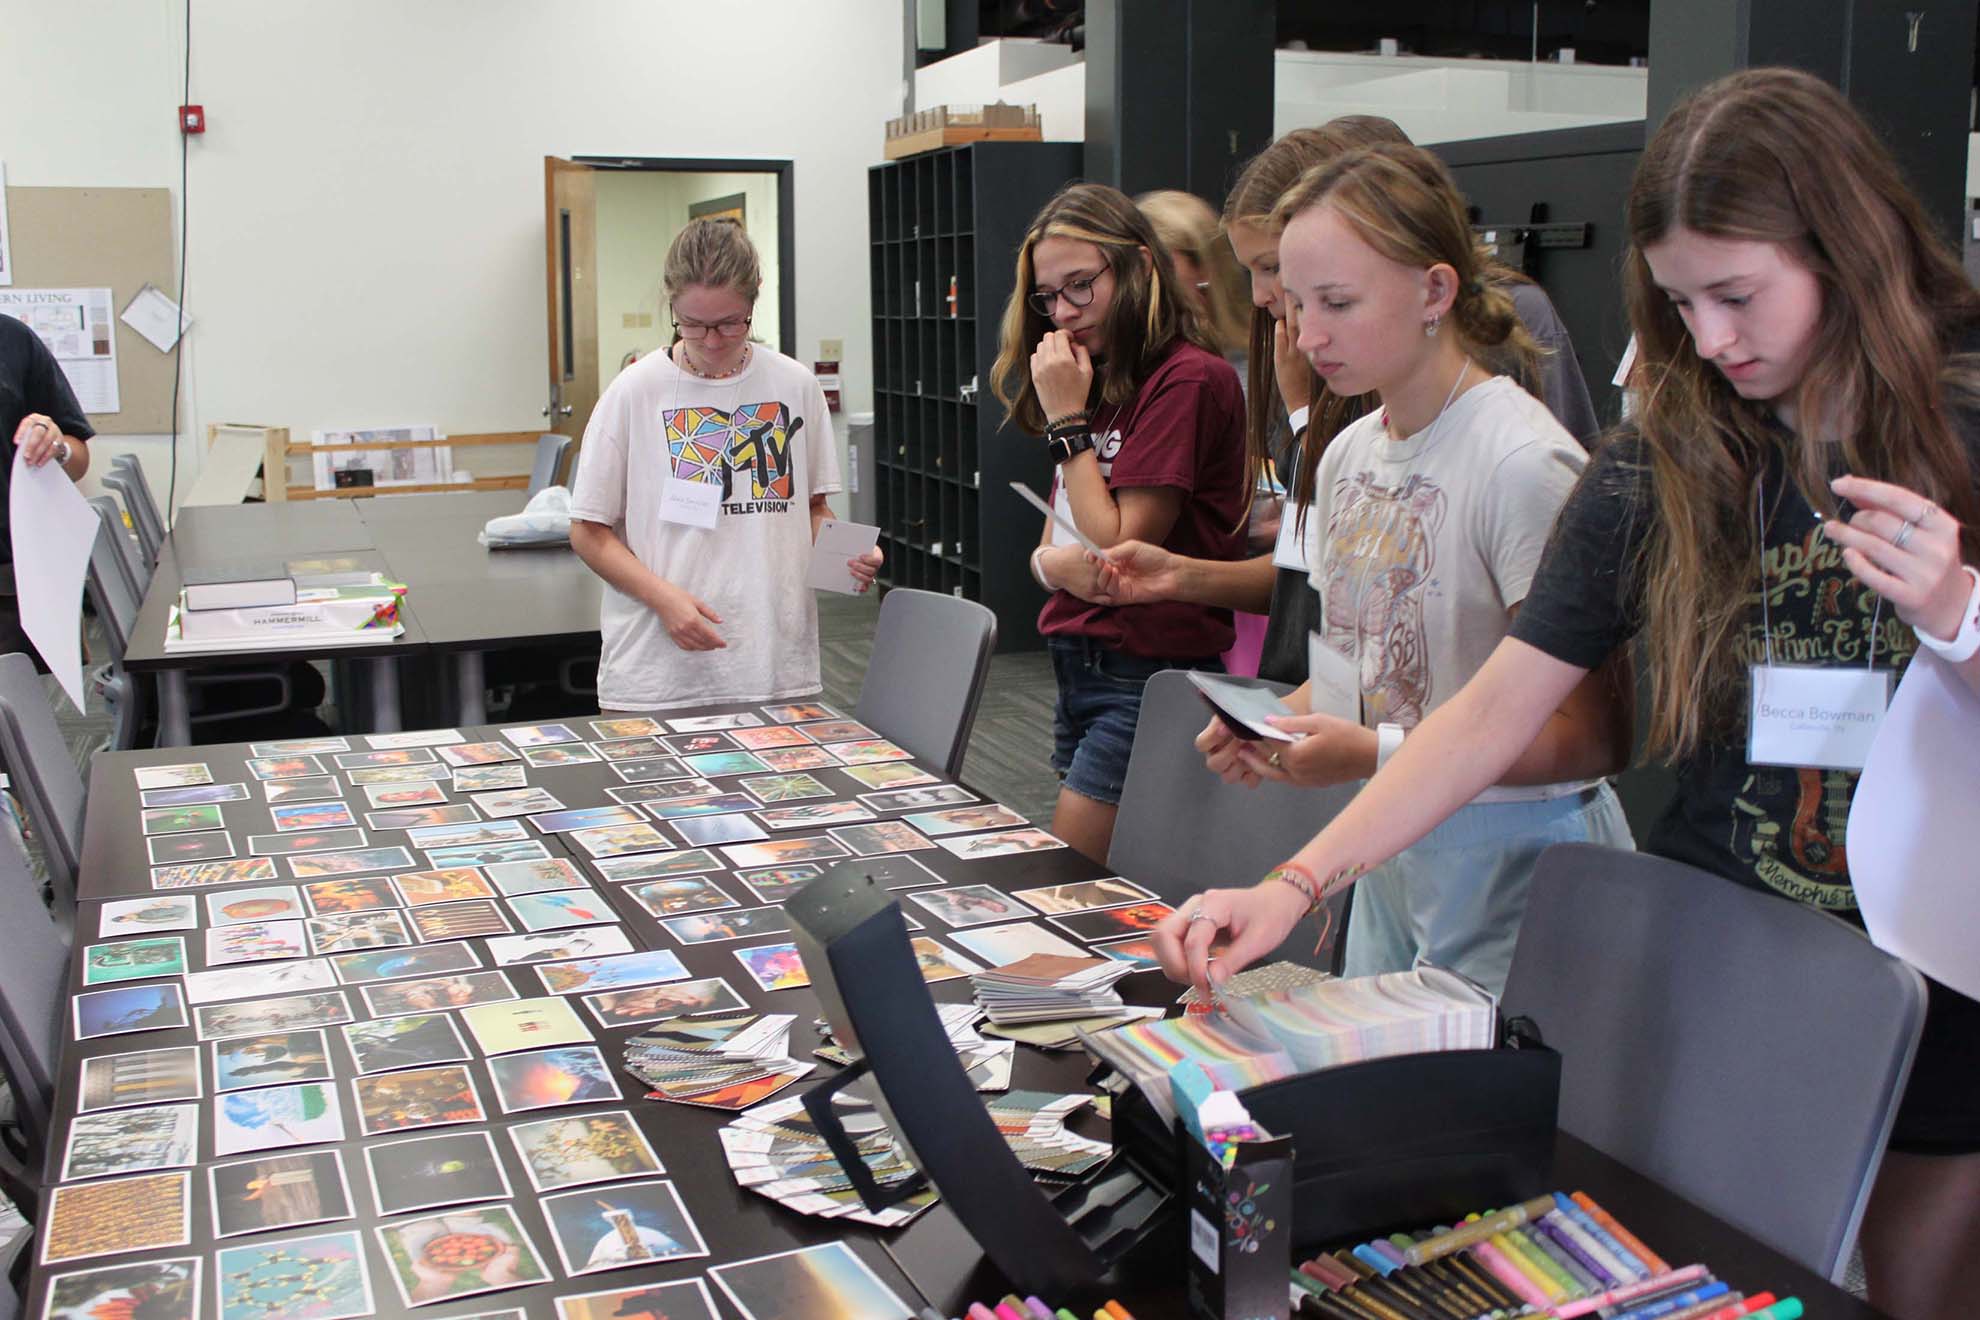 The campers pick out images for their mood boards.